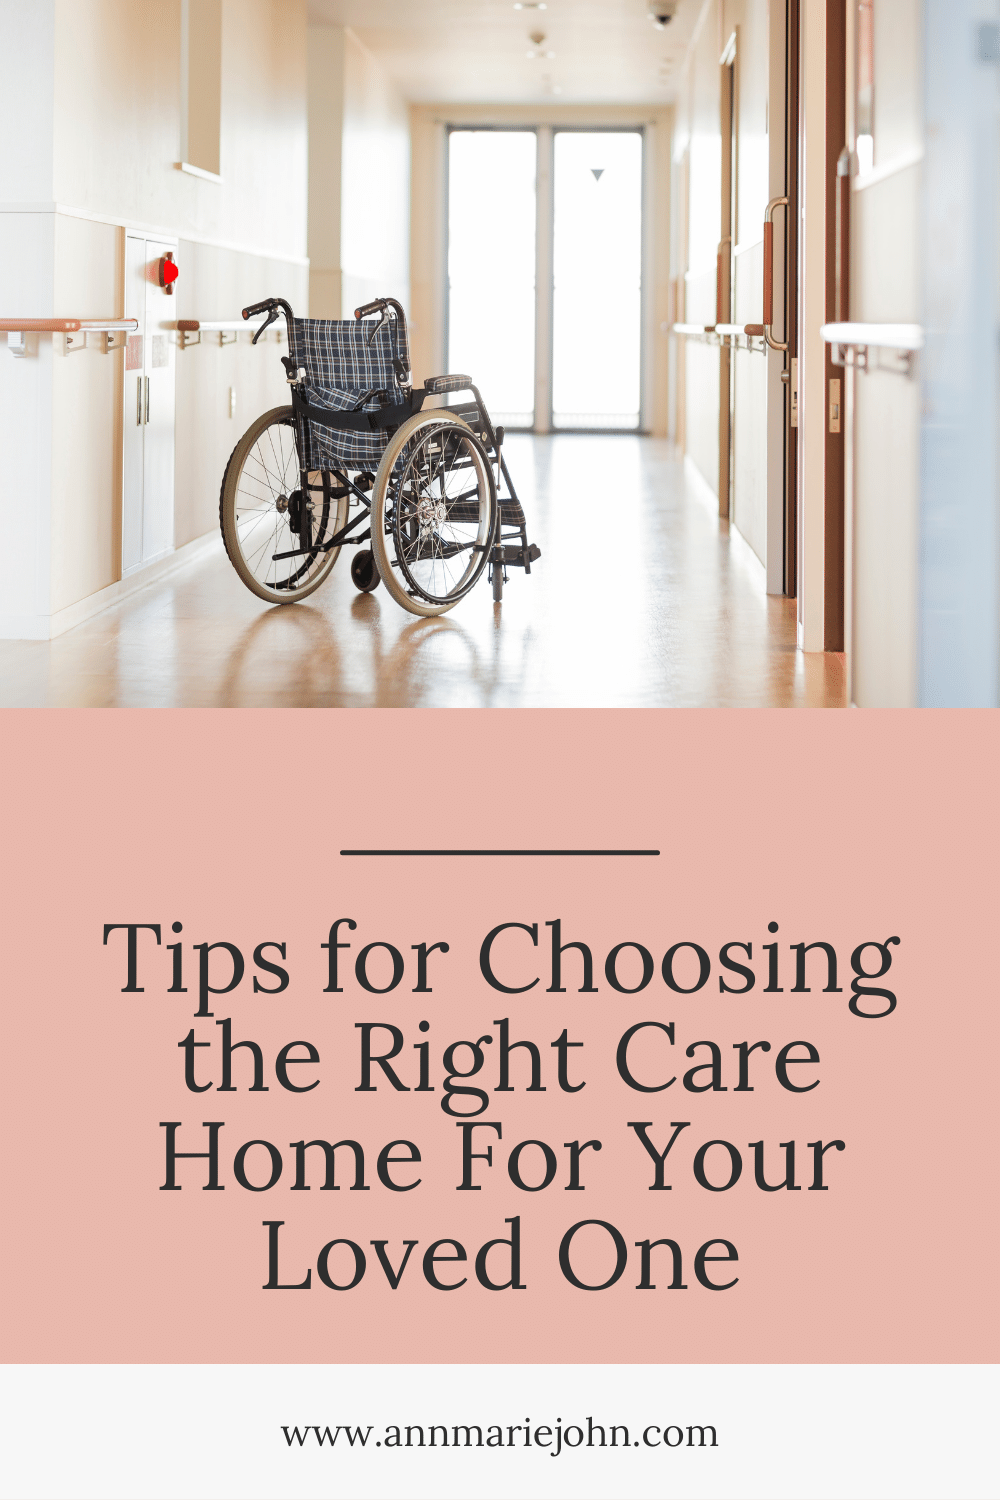 Tips for Choosing the Right Care Home for Your Loved One